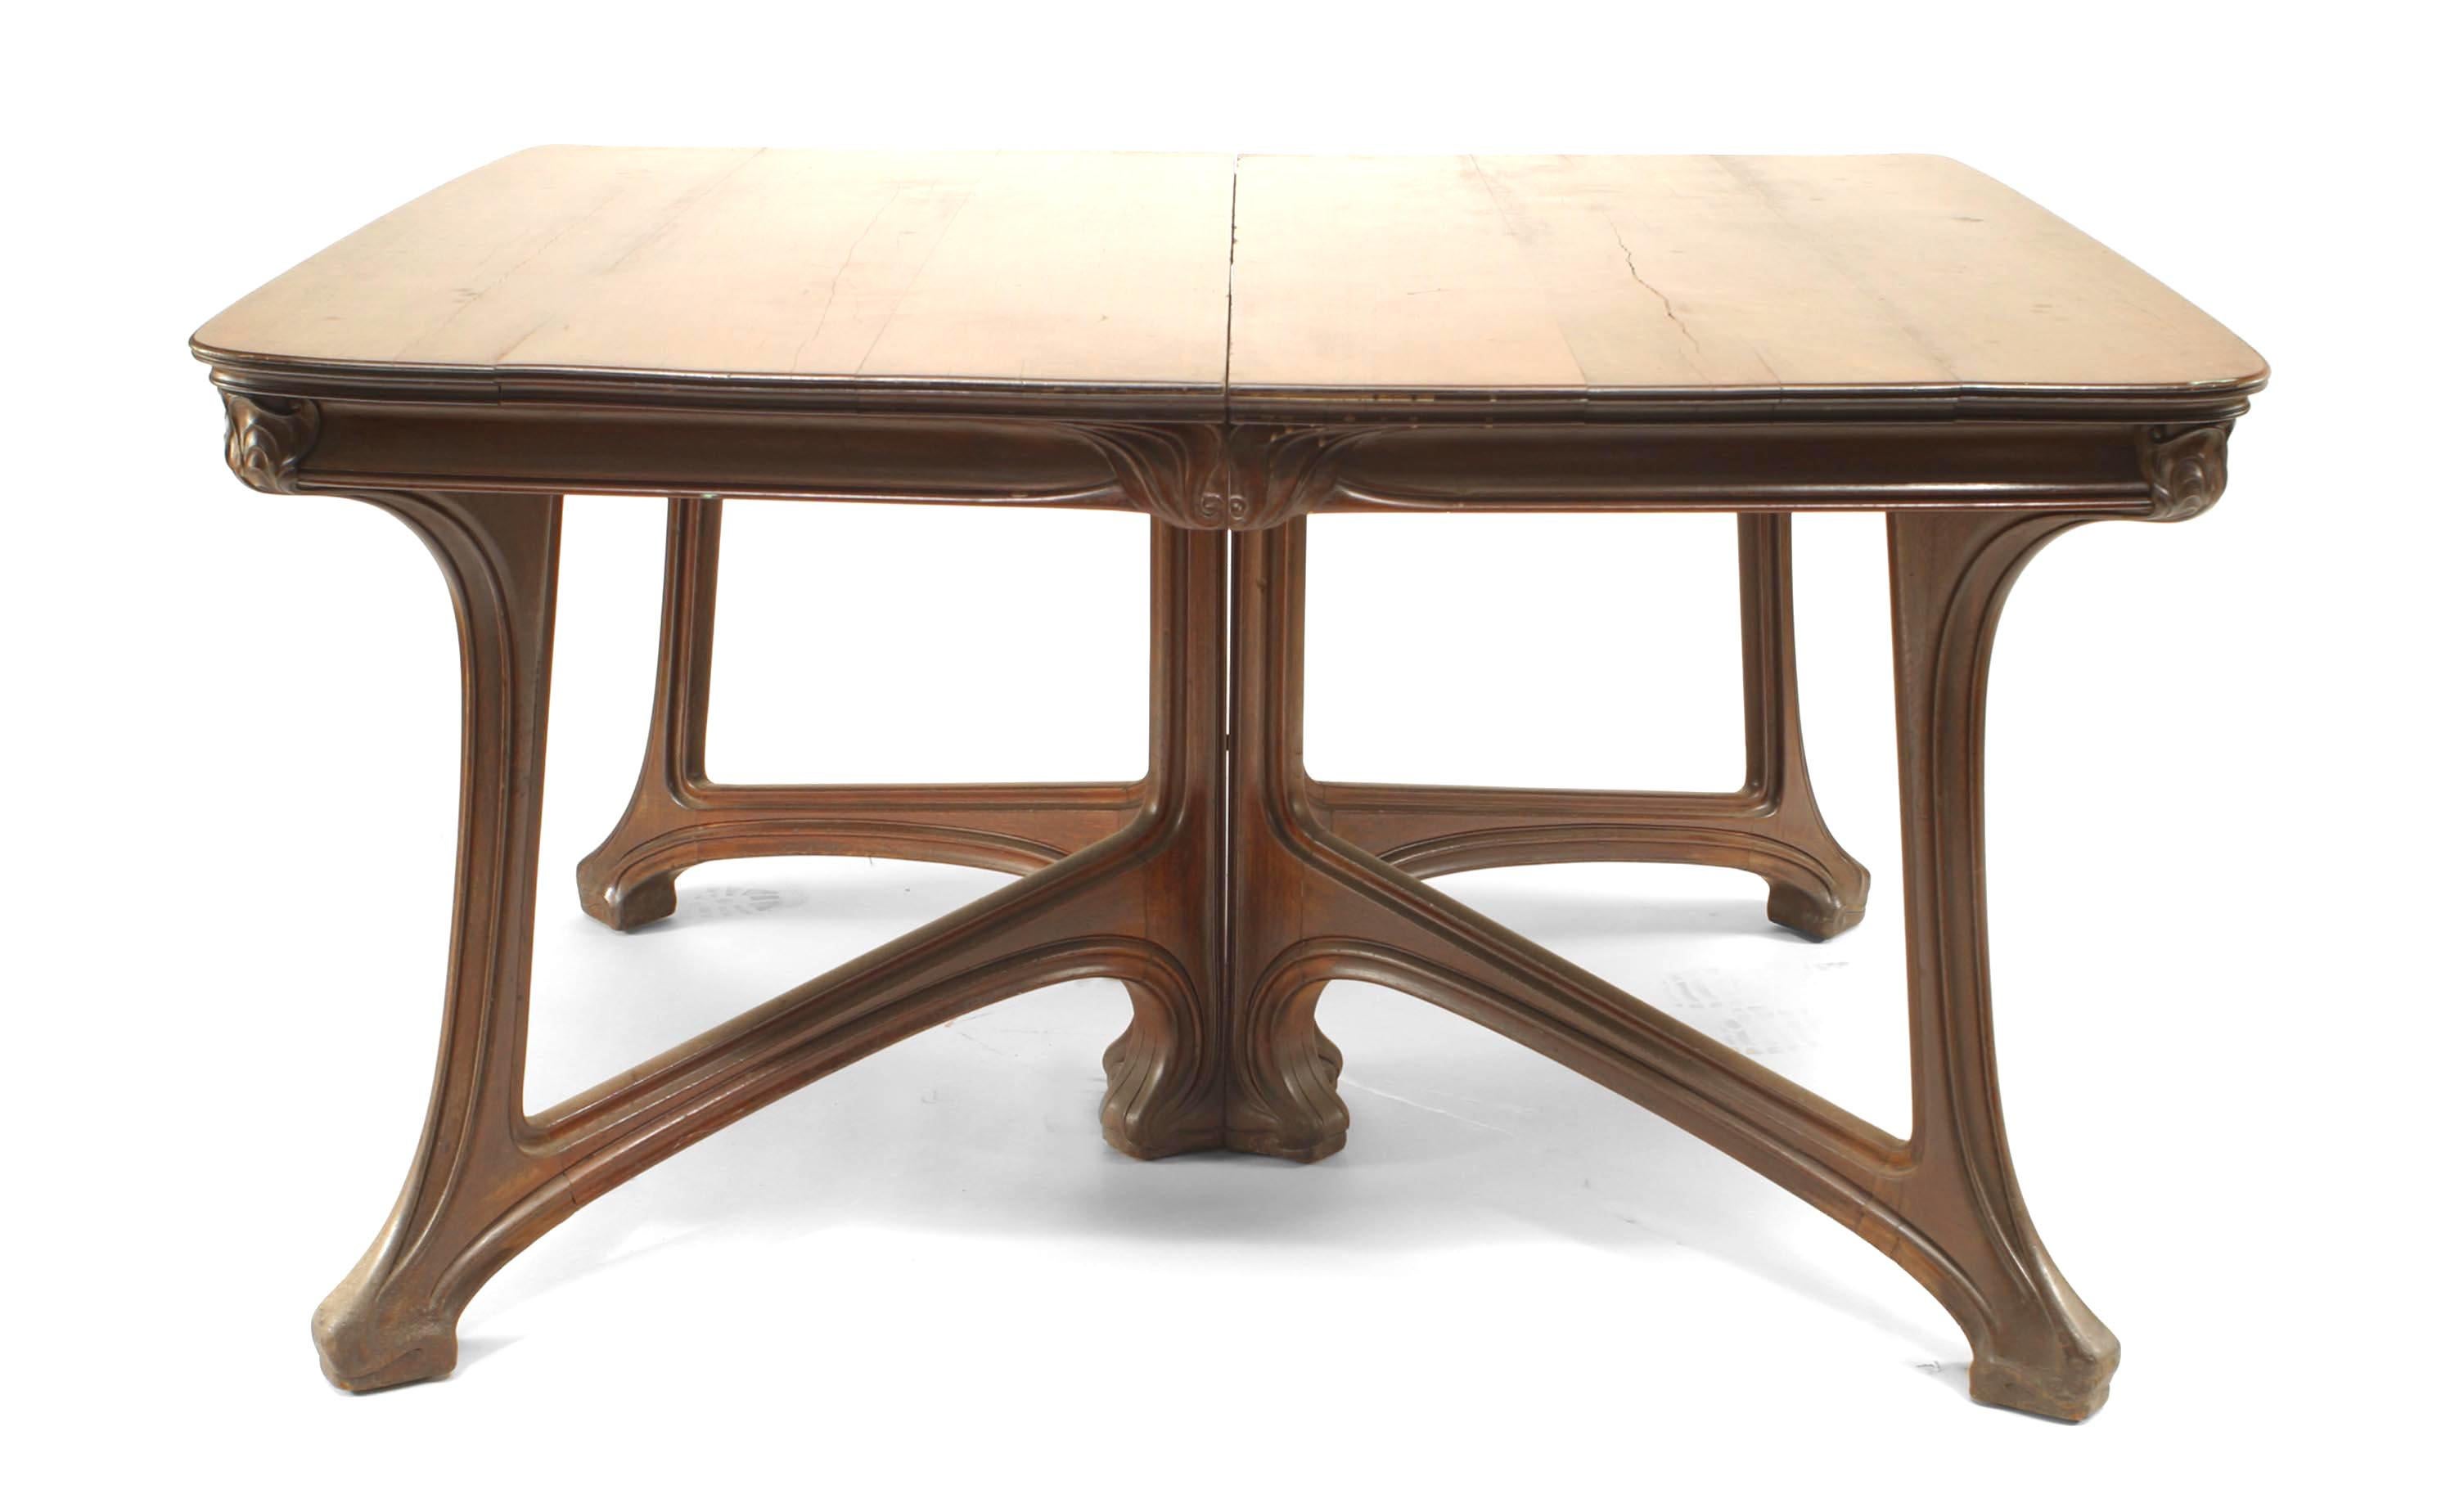 French Art Nouveau walnut 2 section dining table with stretcher. (GAILLARD - page 386, Collectors Encyclopedia of Antiques) (Related Item: 051039)
